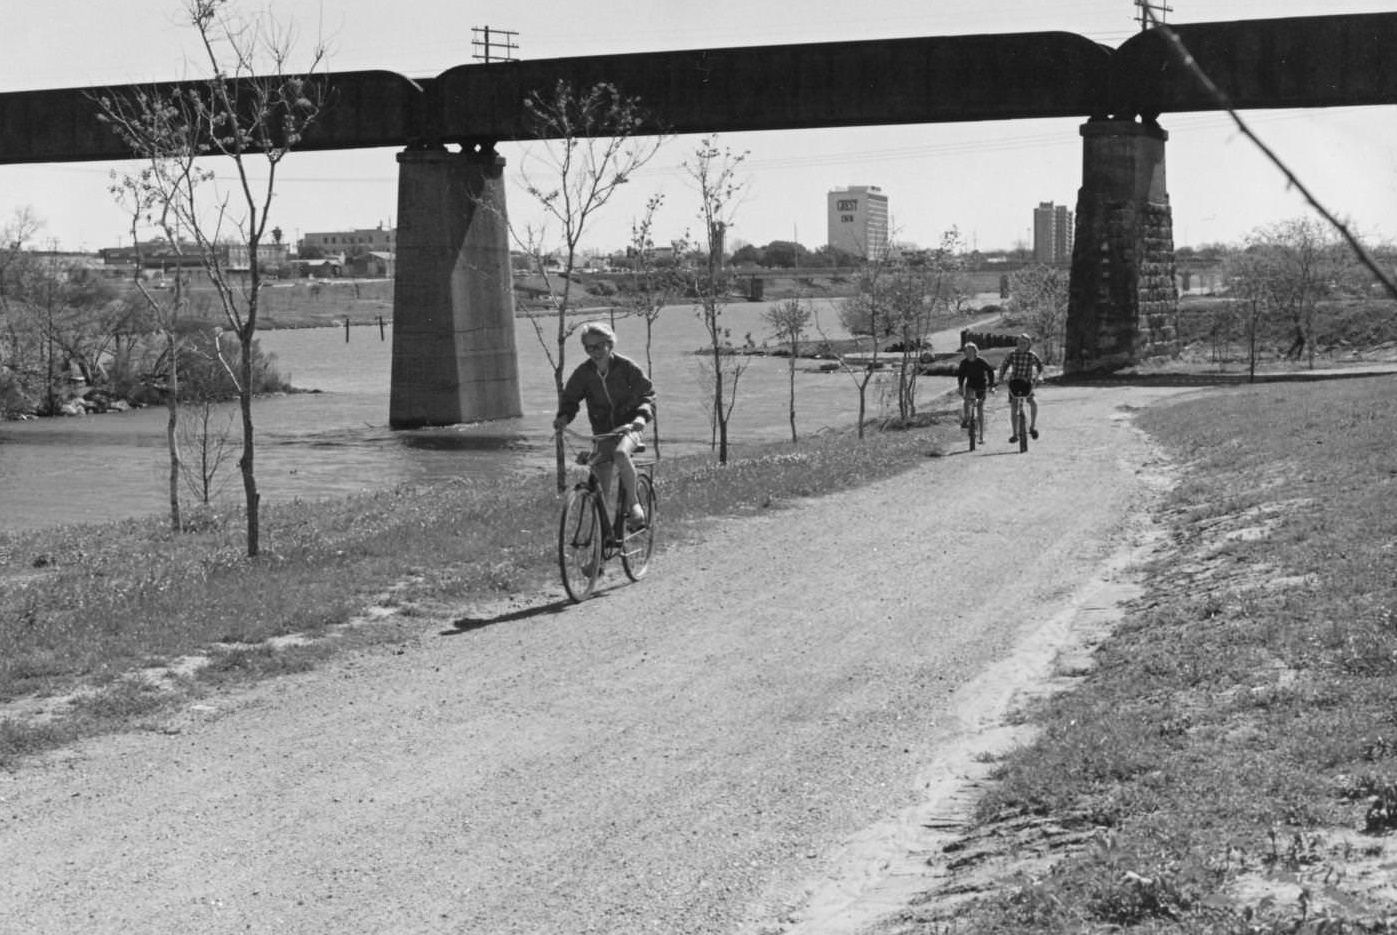 Auditorium Shores on Town Lake, looking east, with three boys riding bikes on a gravel path, 1972 .A railroad bridge crosses the river behind them. Crest Inn is visible in the distance.